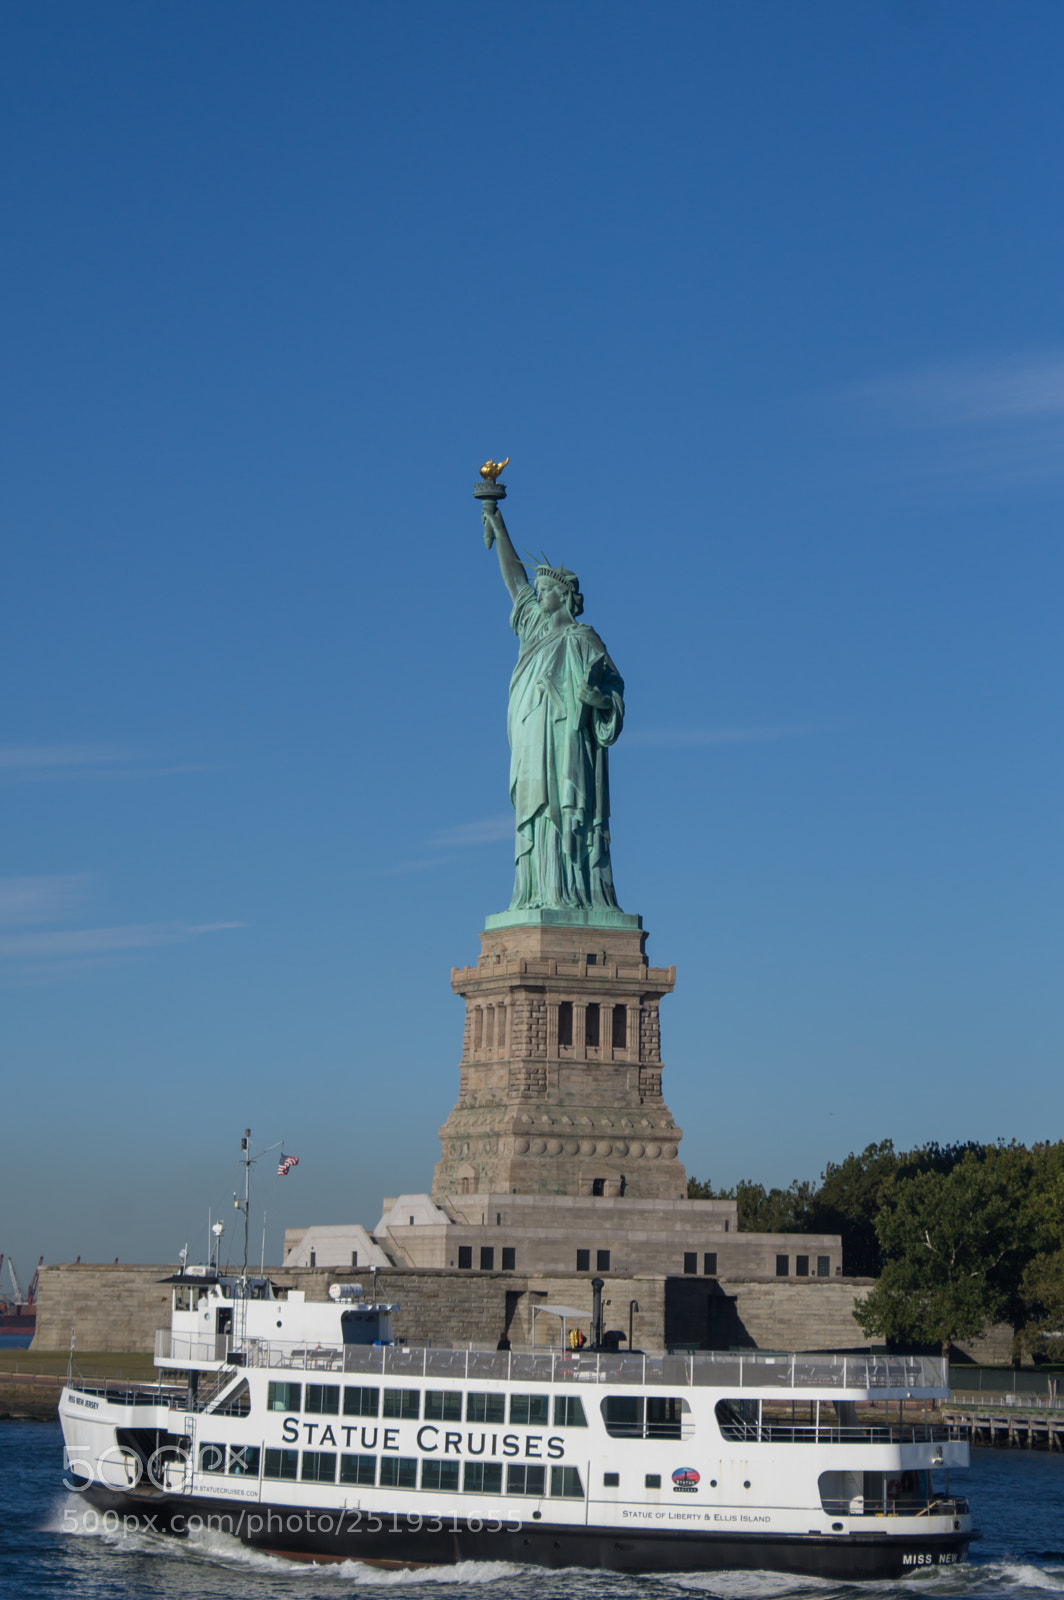 Sony SLT-A37 sample photo. Statue cruises ferry in photography